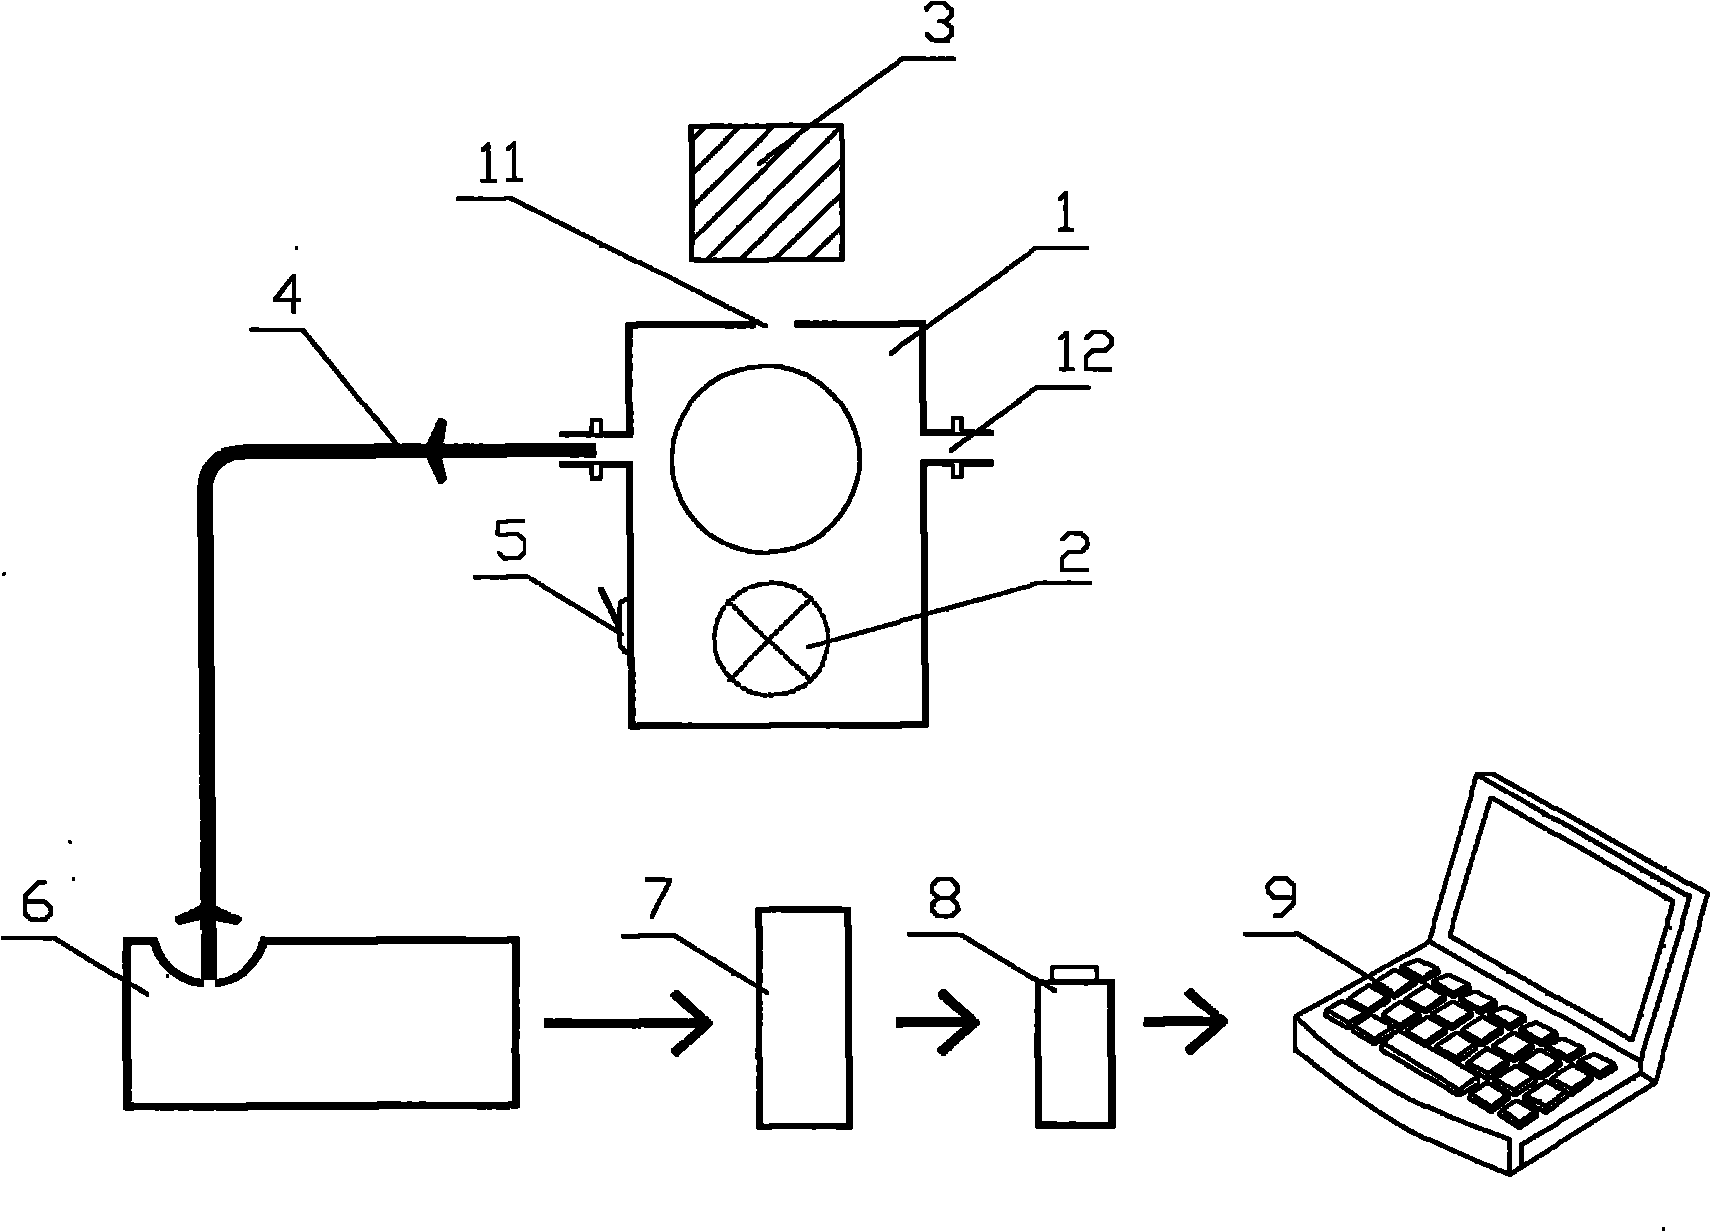 Reflective spectral measurement sampling method for jewelry or jewel detection